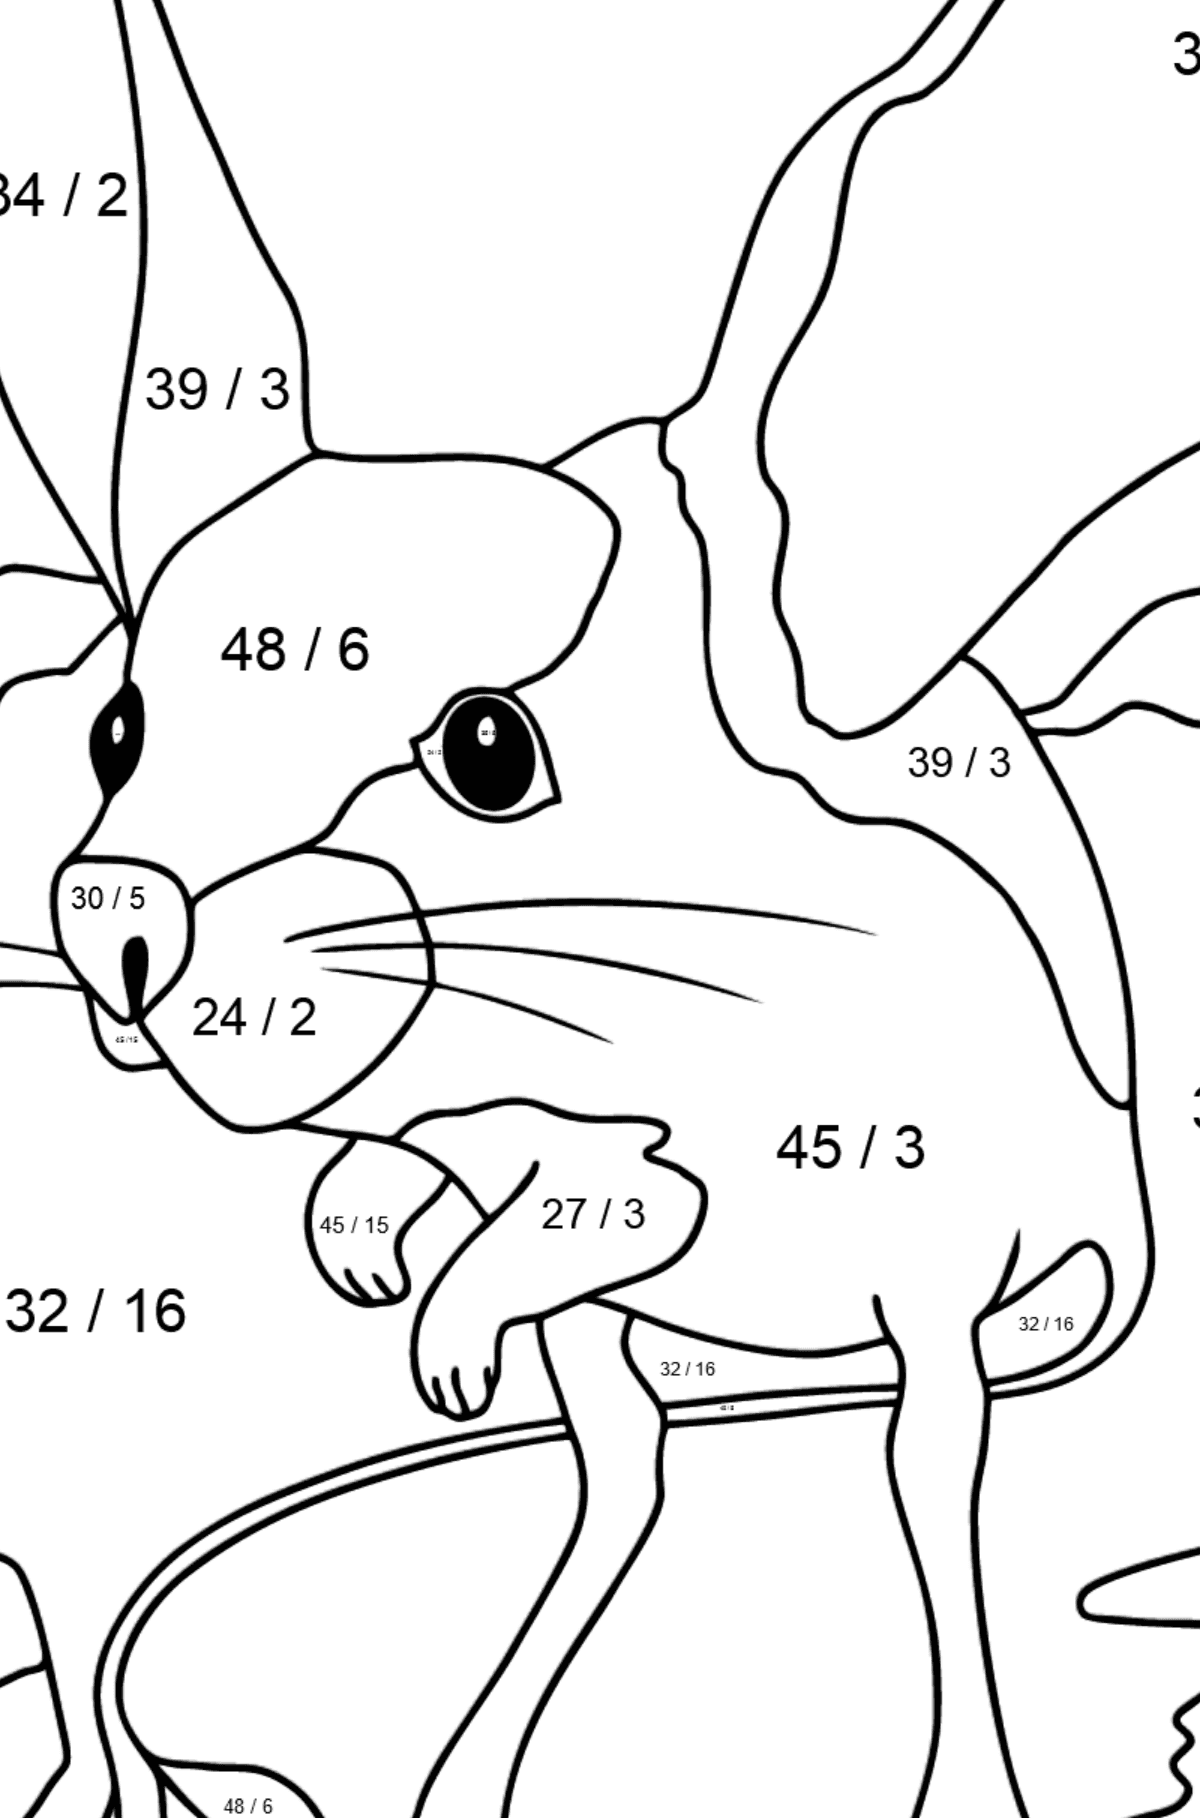 A Jerboa is Inspecting the Area Coloring Page - Math Coloring - Division for Kids